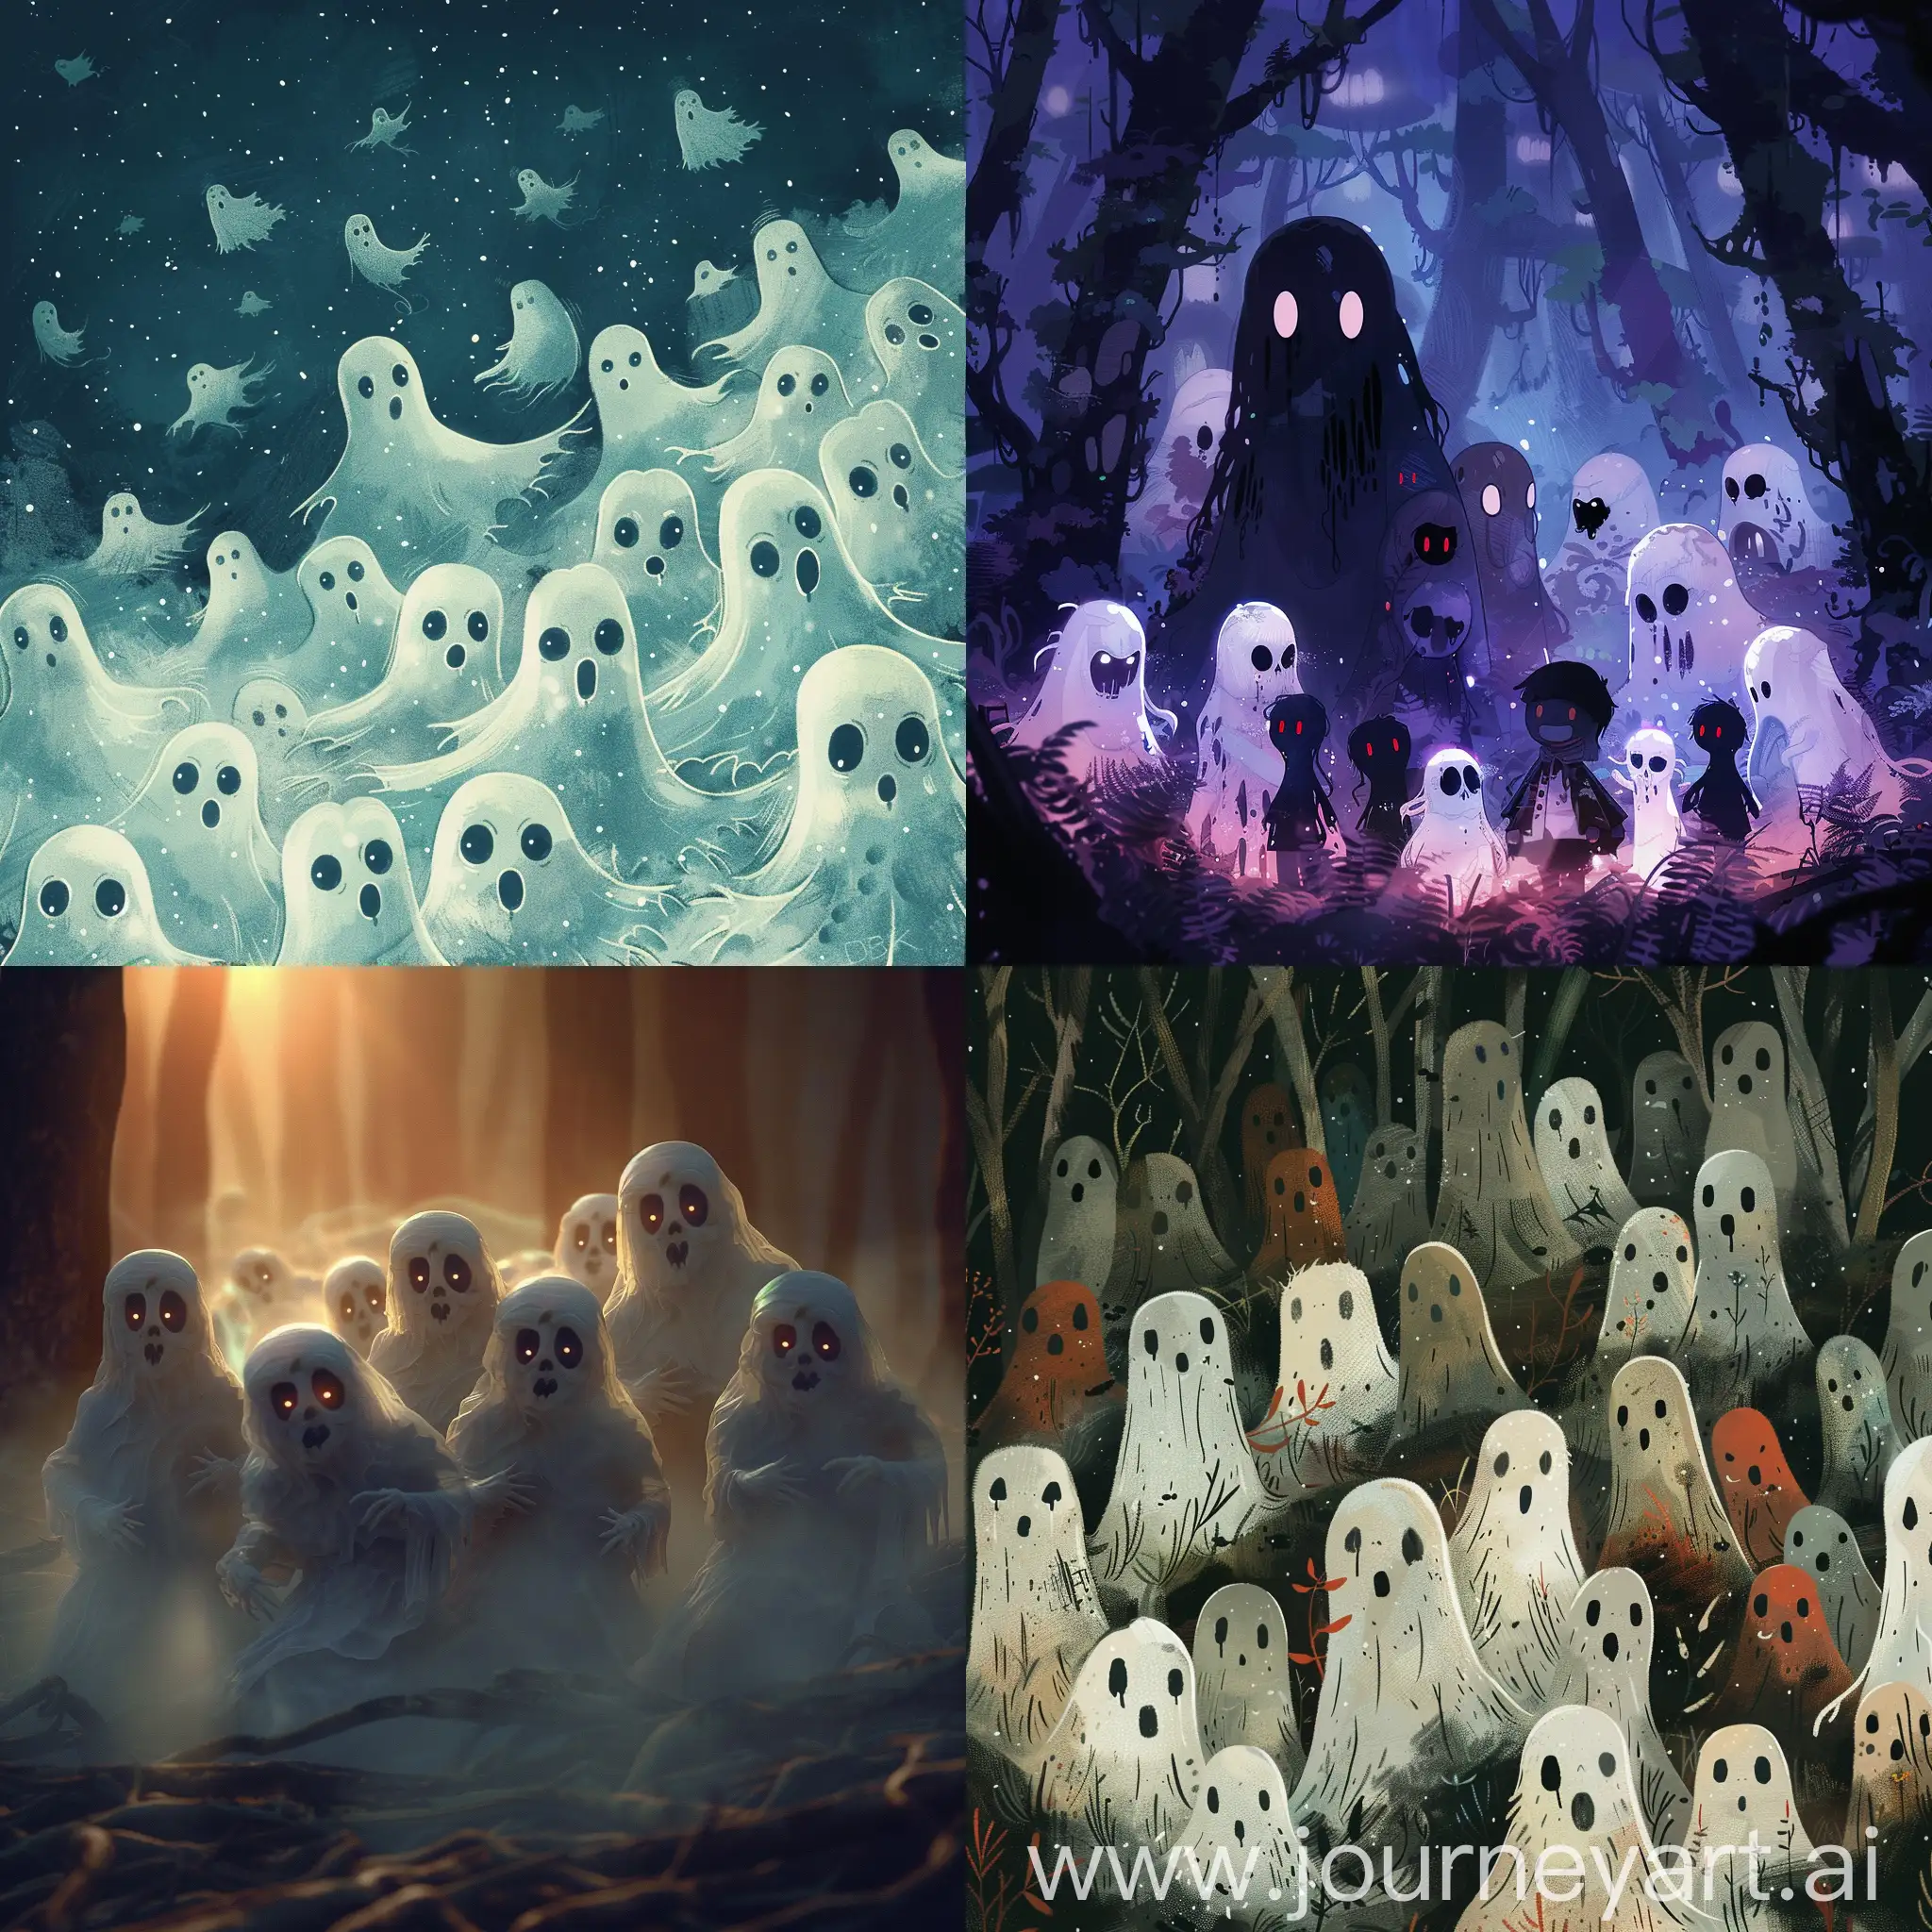 Spooky-Gathering-of-a-Million-Ghosts